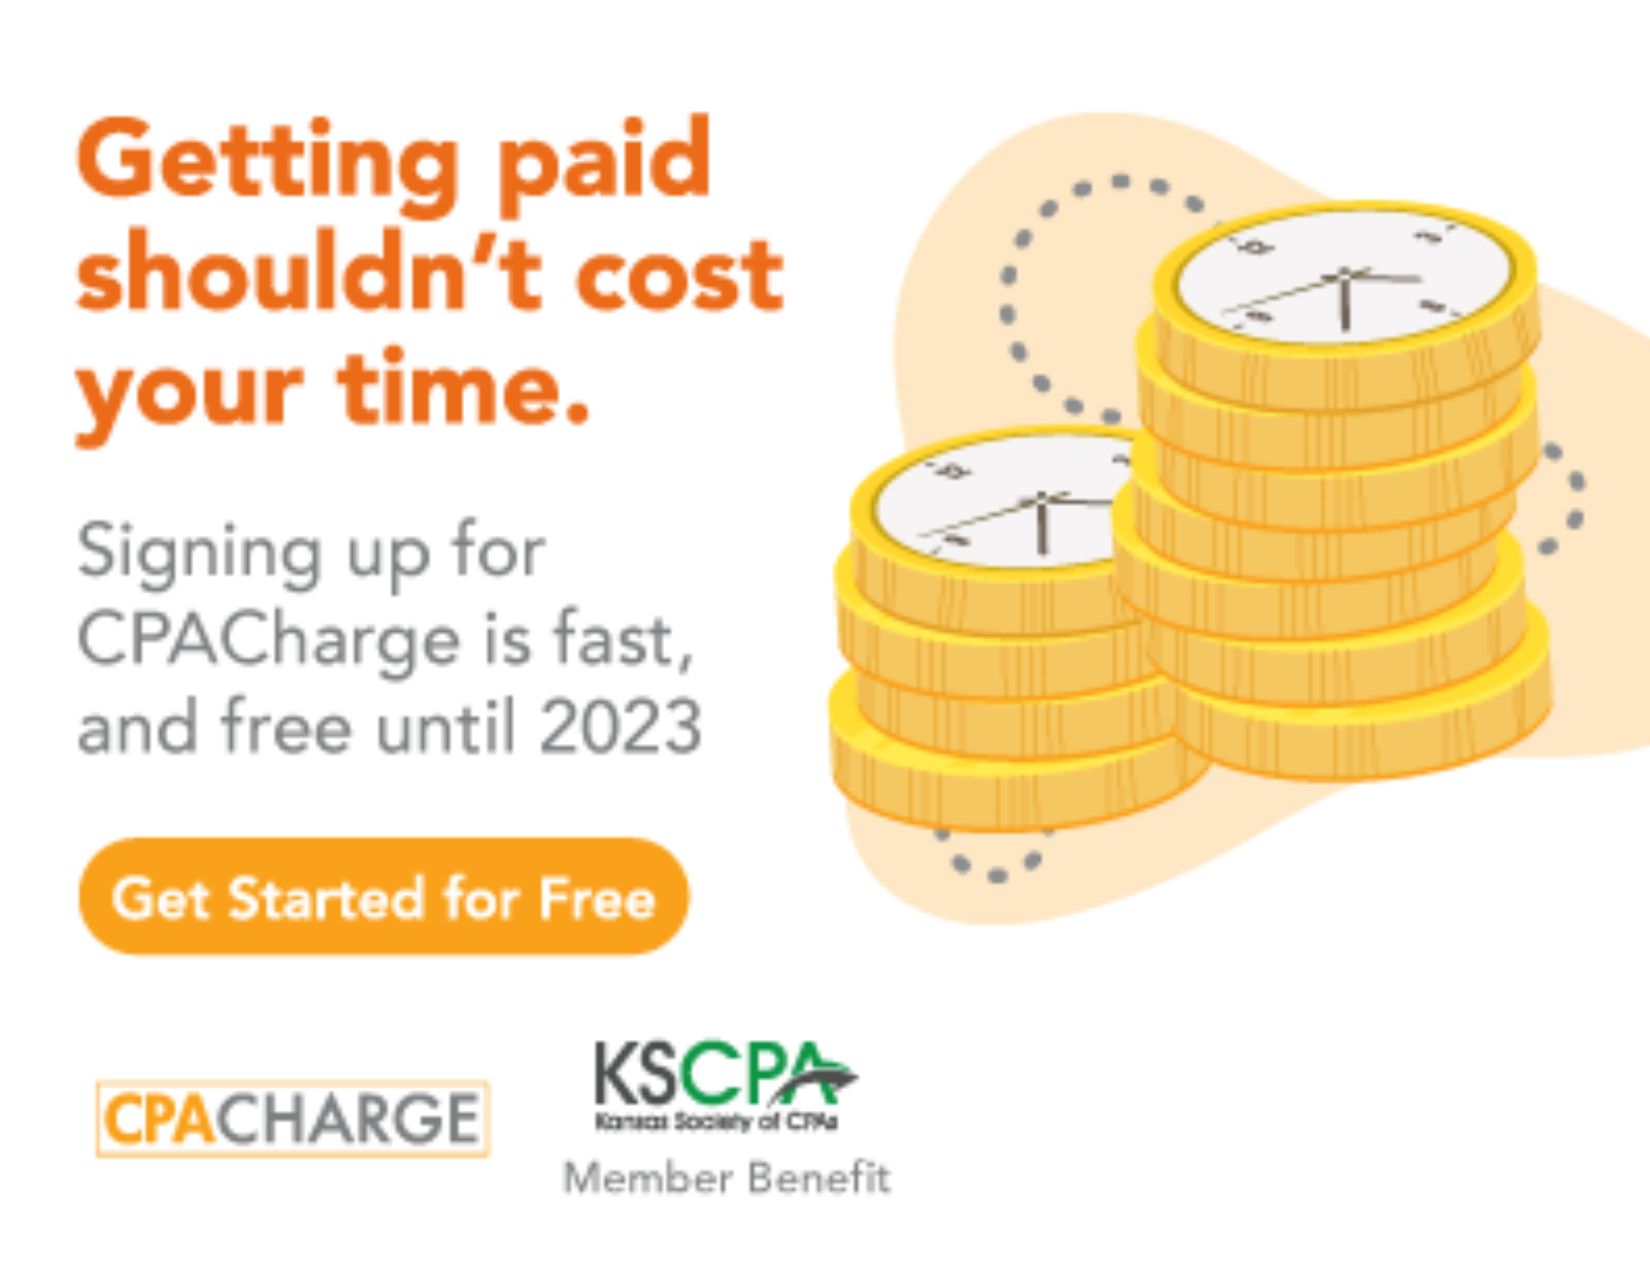 CPA Charge Blog Ad 8.22